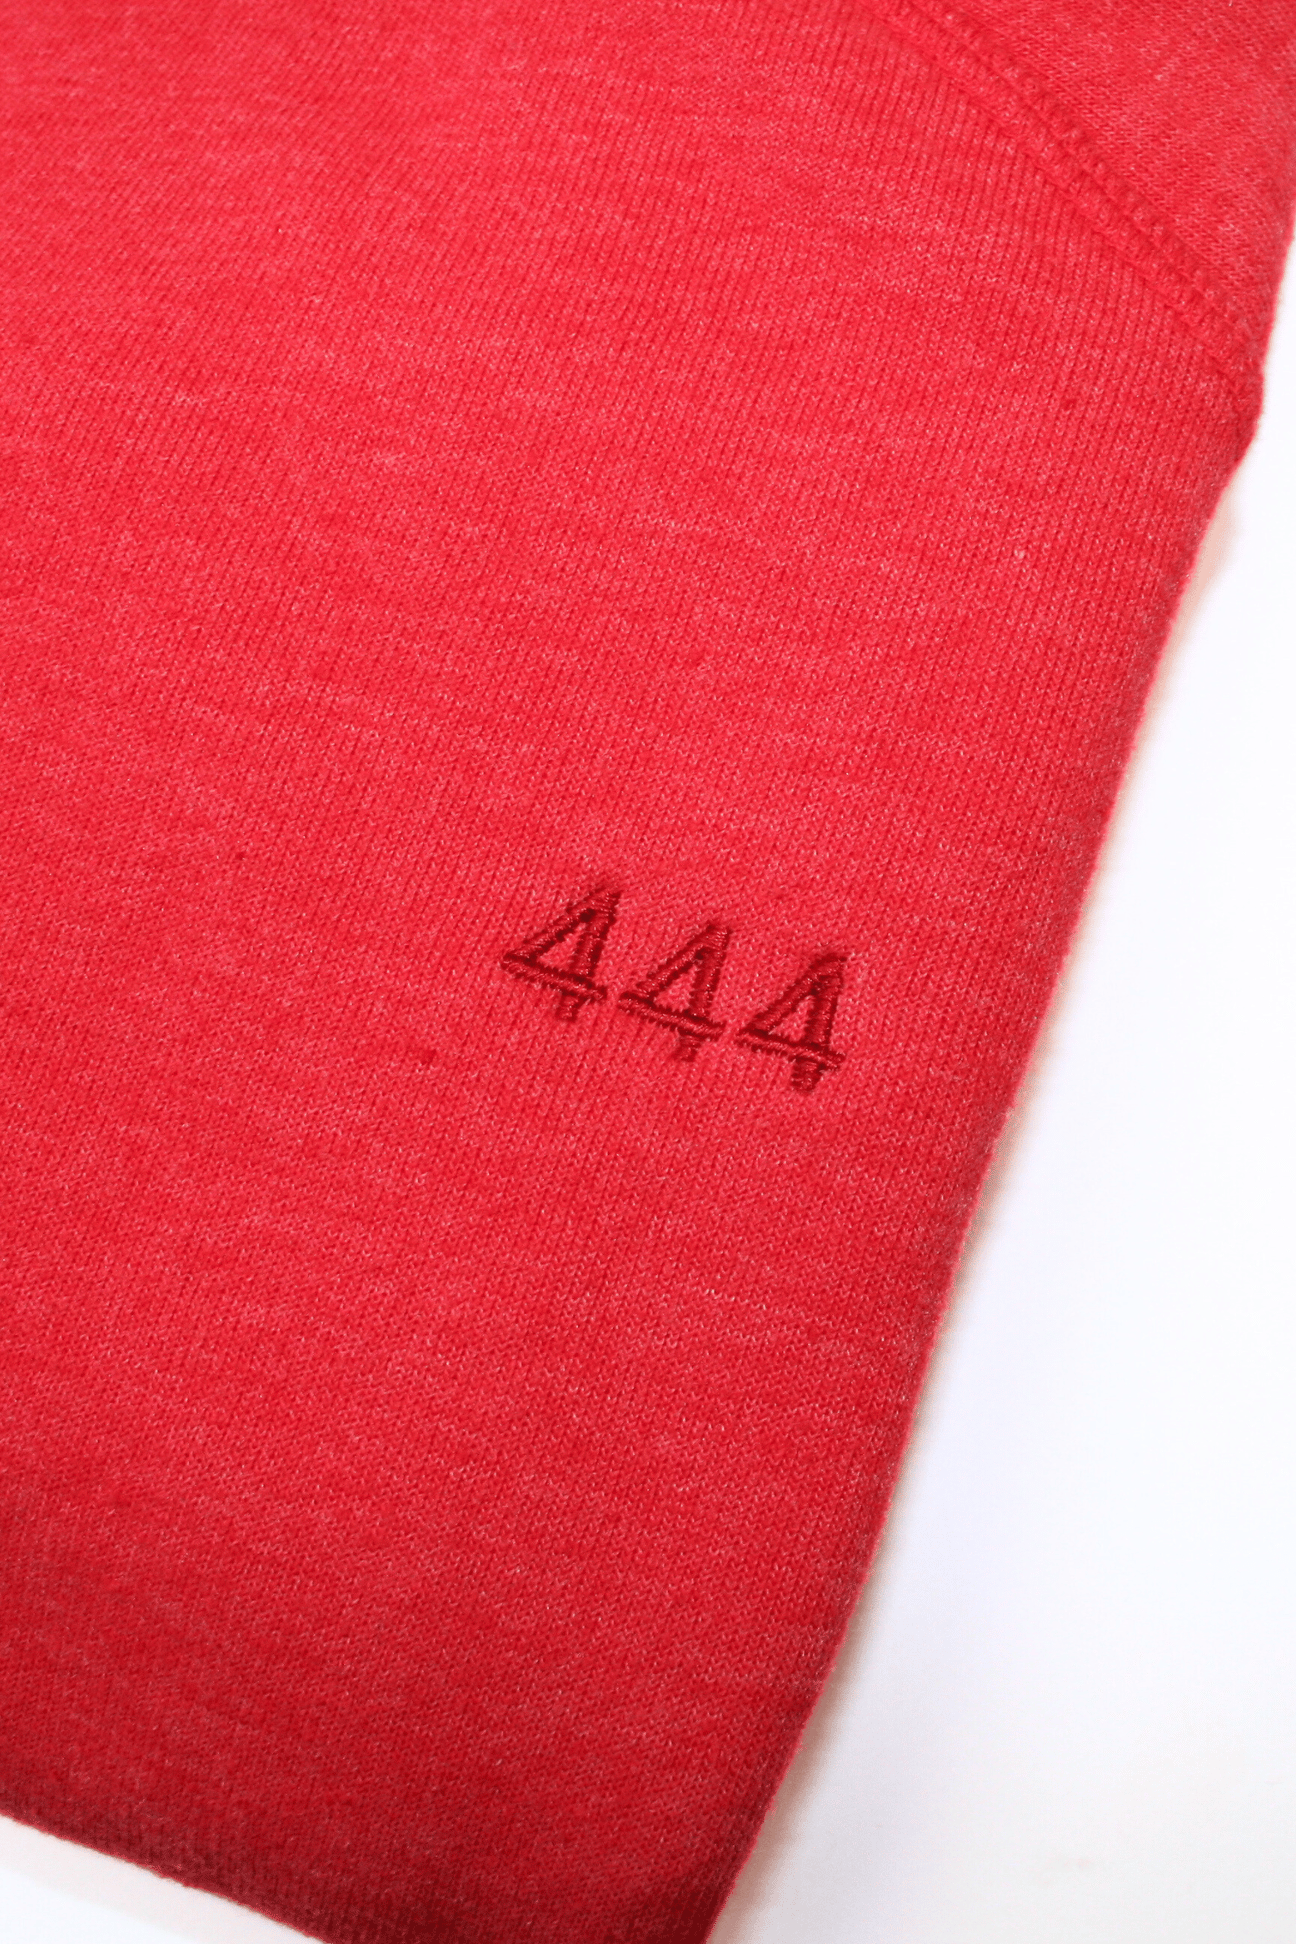 Close-up of a red fabric with a size label reading 